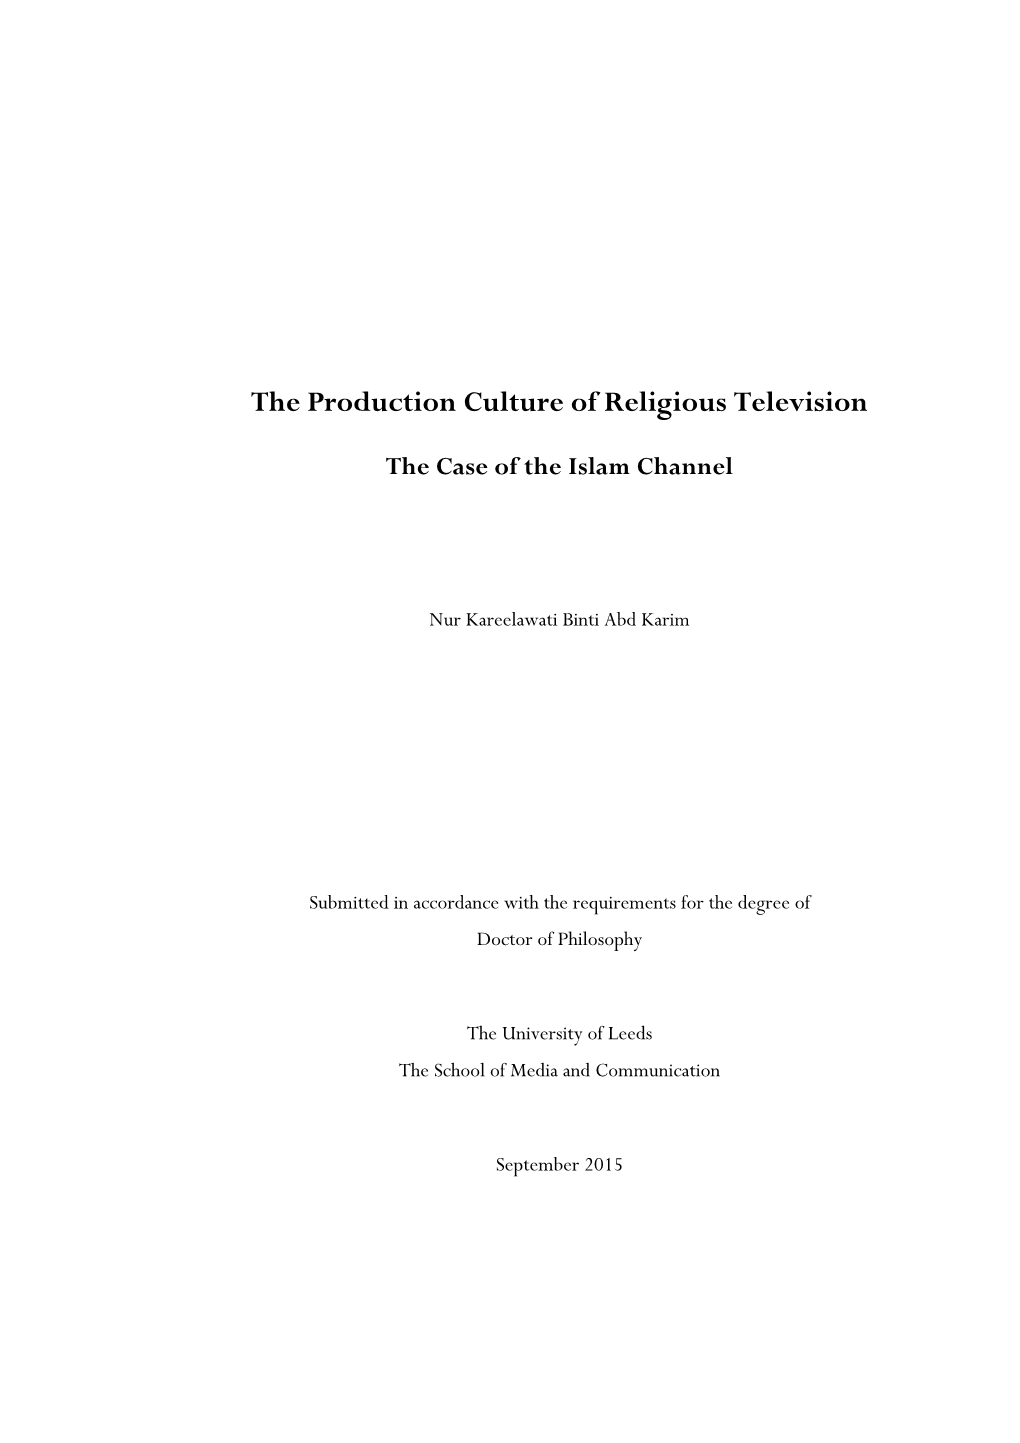 The Production Culture of Religious Television